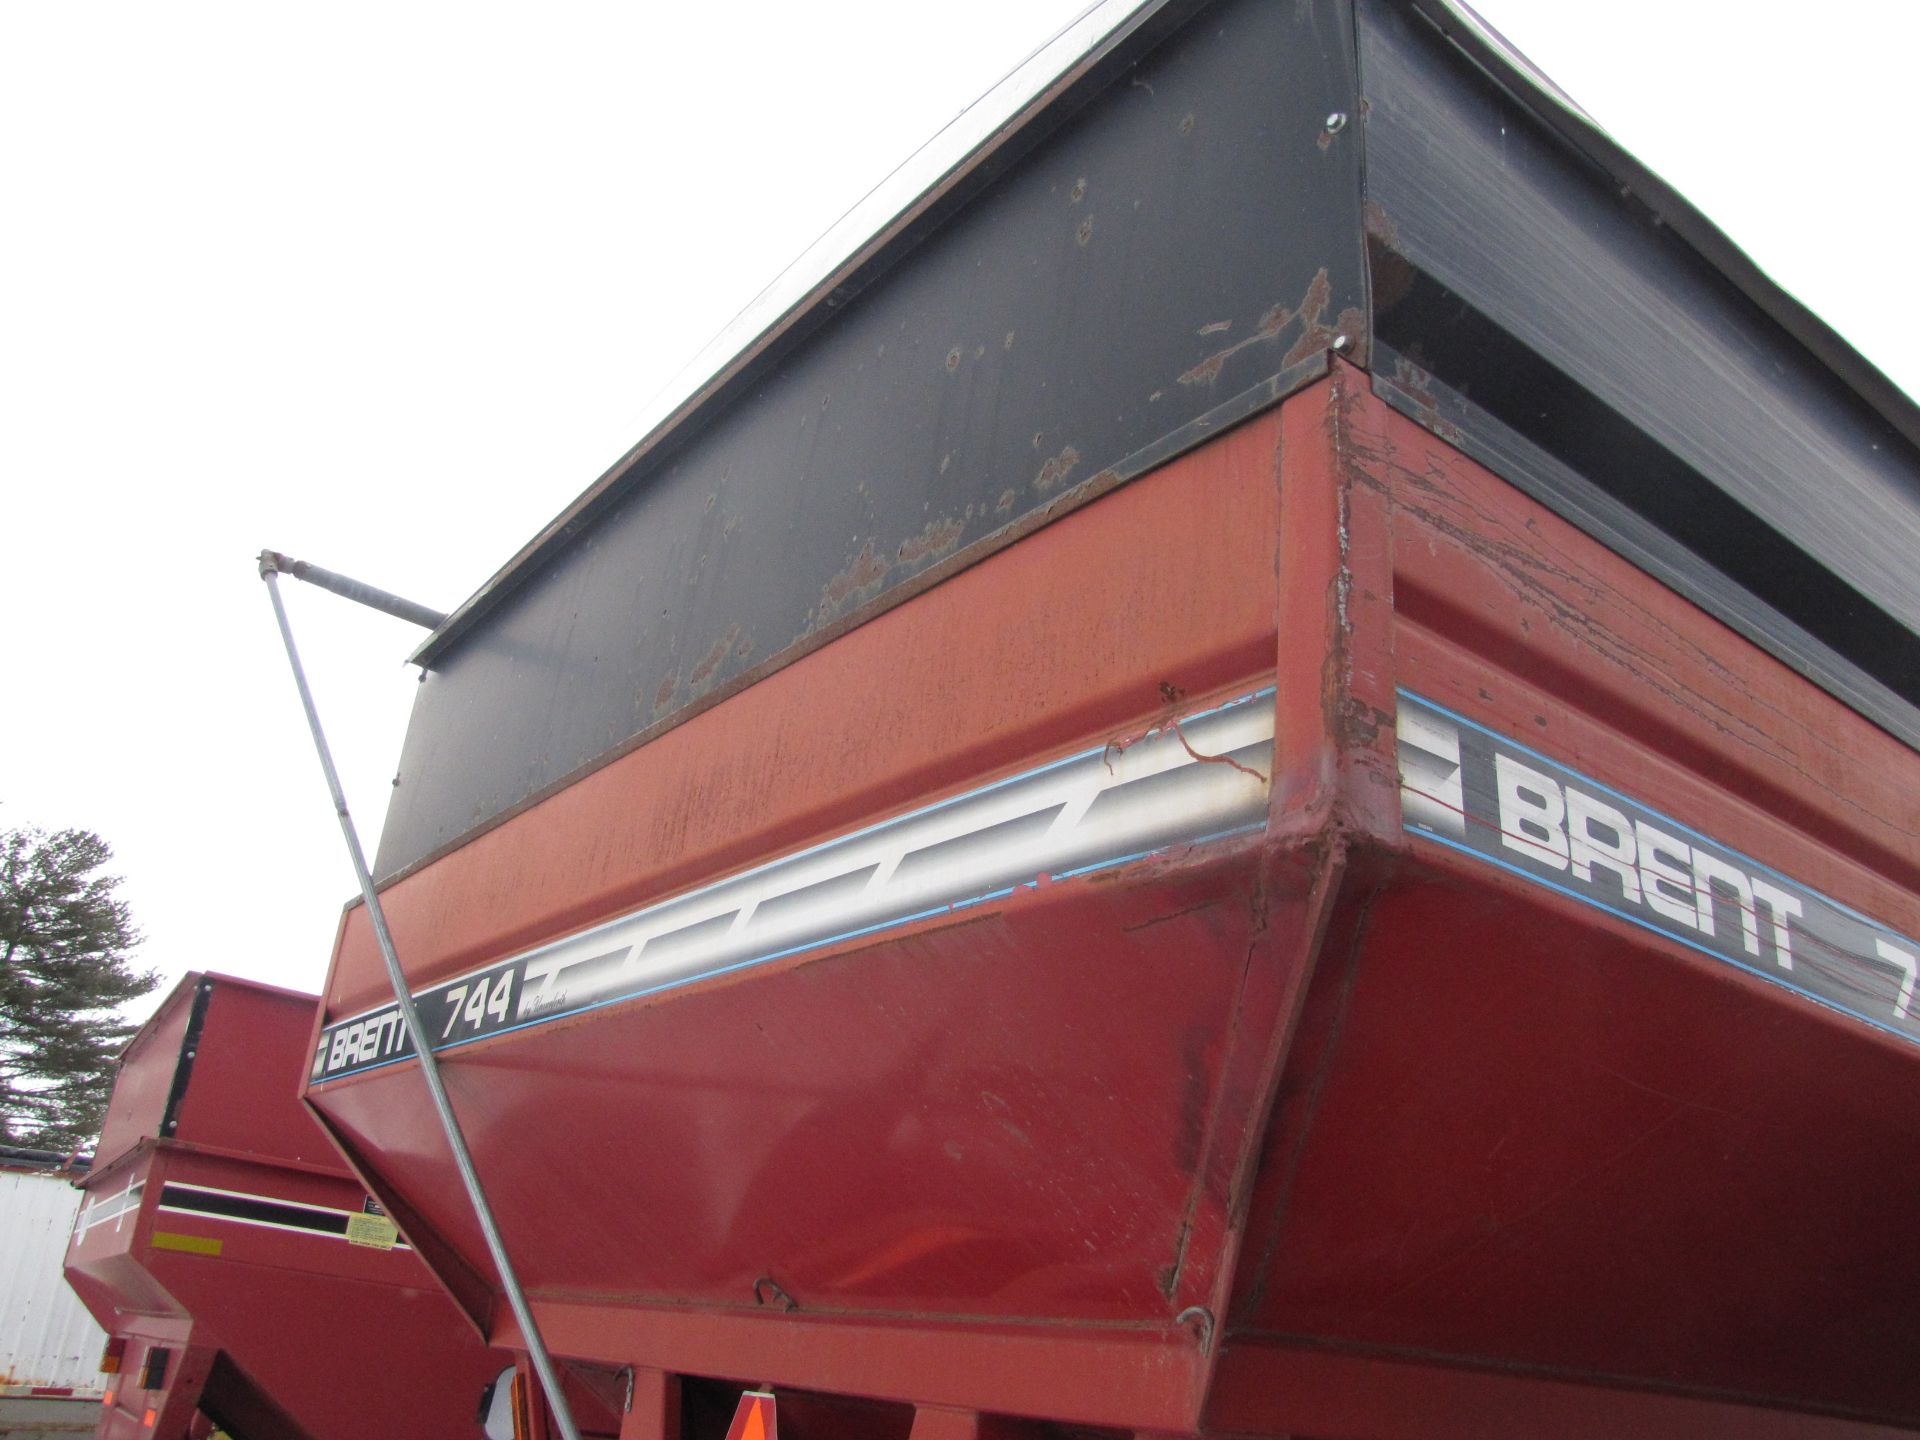 Brent 774 gravity wagon - Image 17 of 32